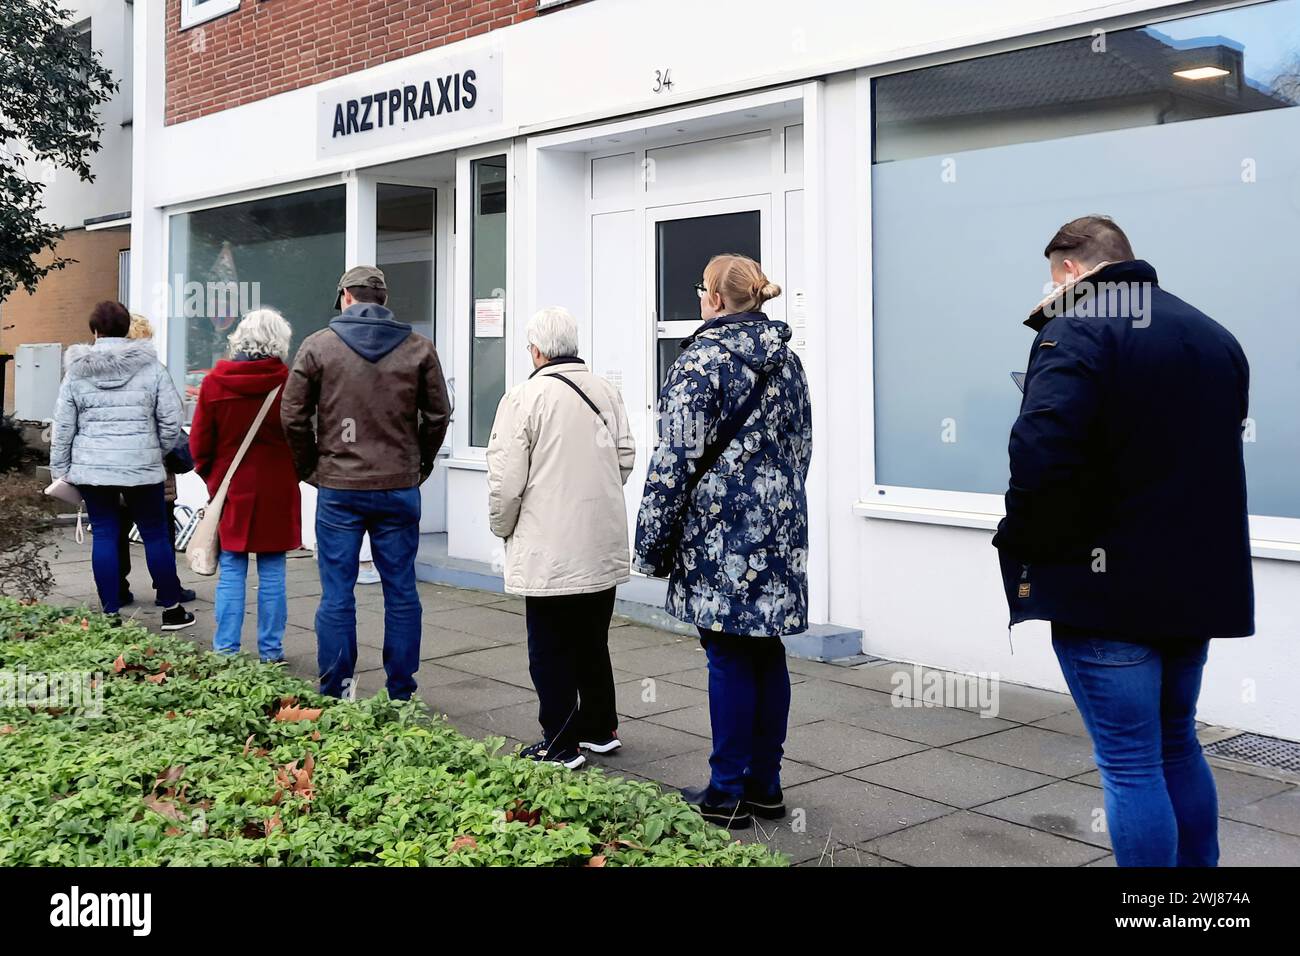 Dortmund, Germany, February 13, 2014: Due to the shortage of MFA medical assistants and higher illness rates, patients are standing in a queue outside a doctor's office in Dortmund. Stock Photo